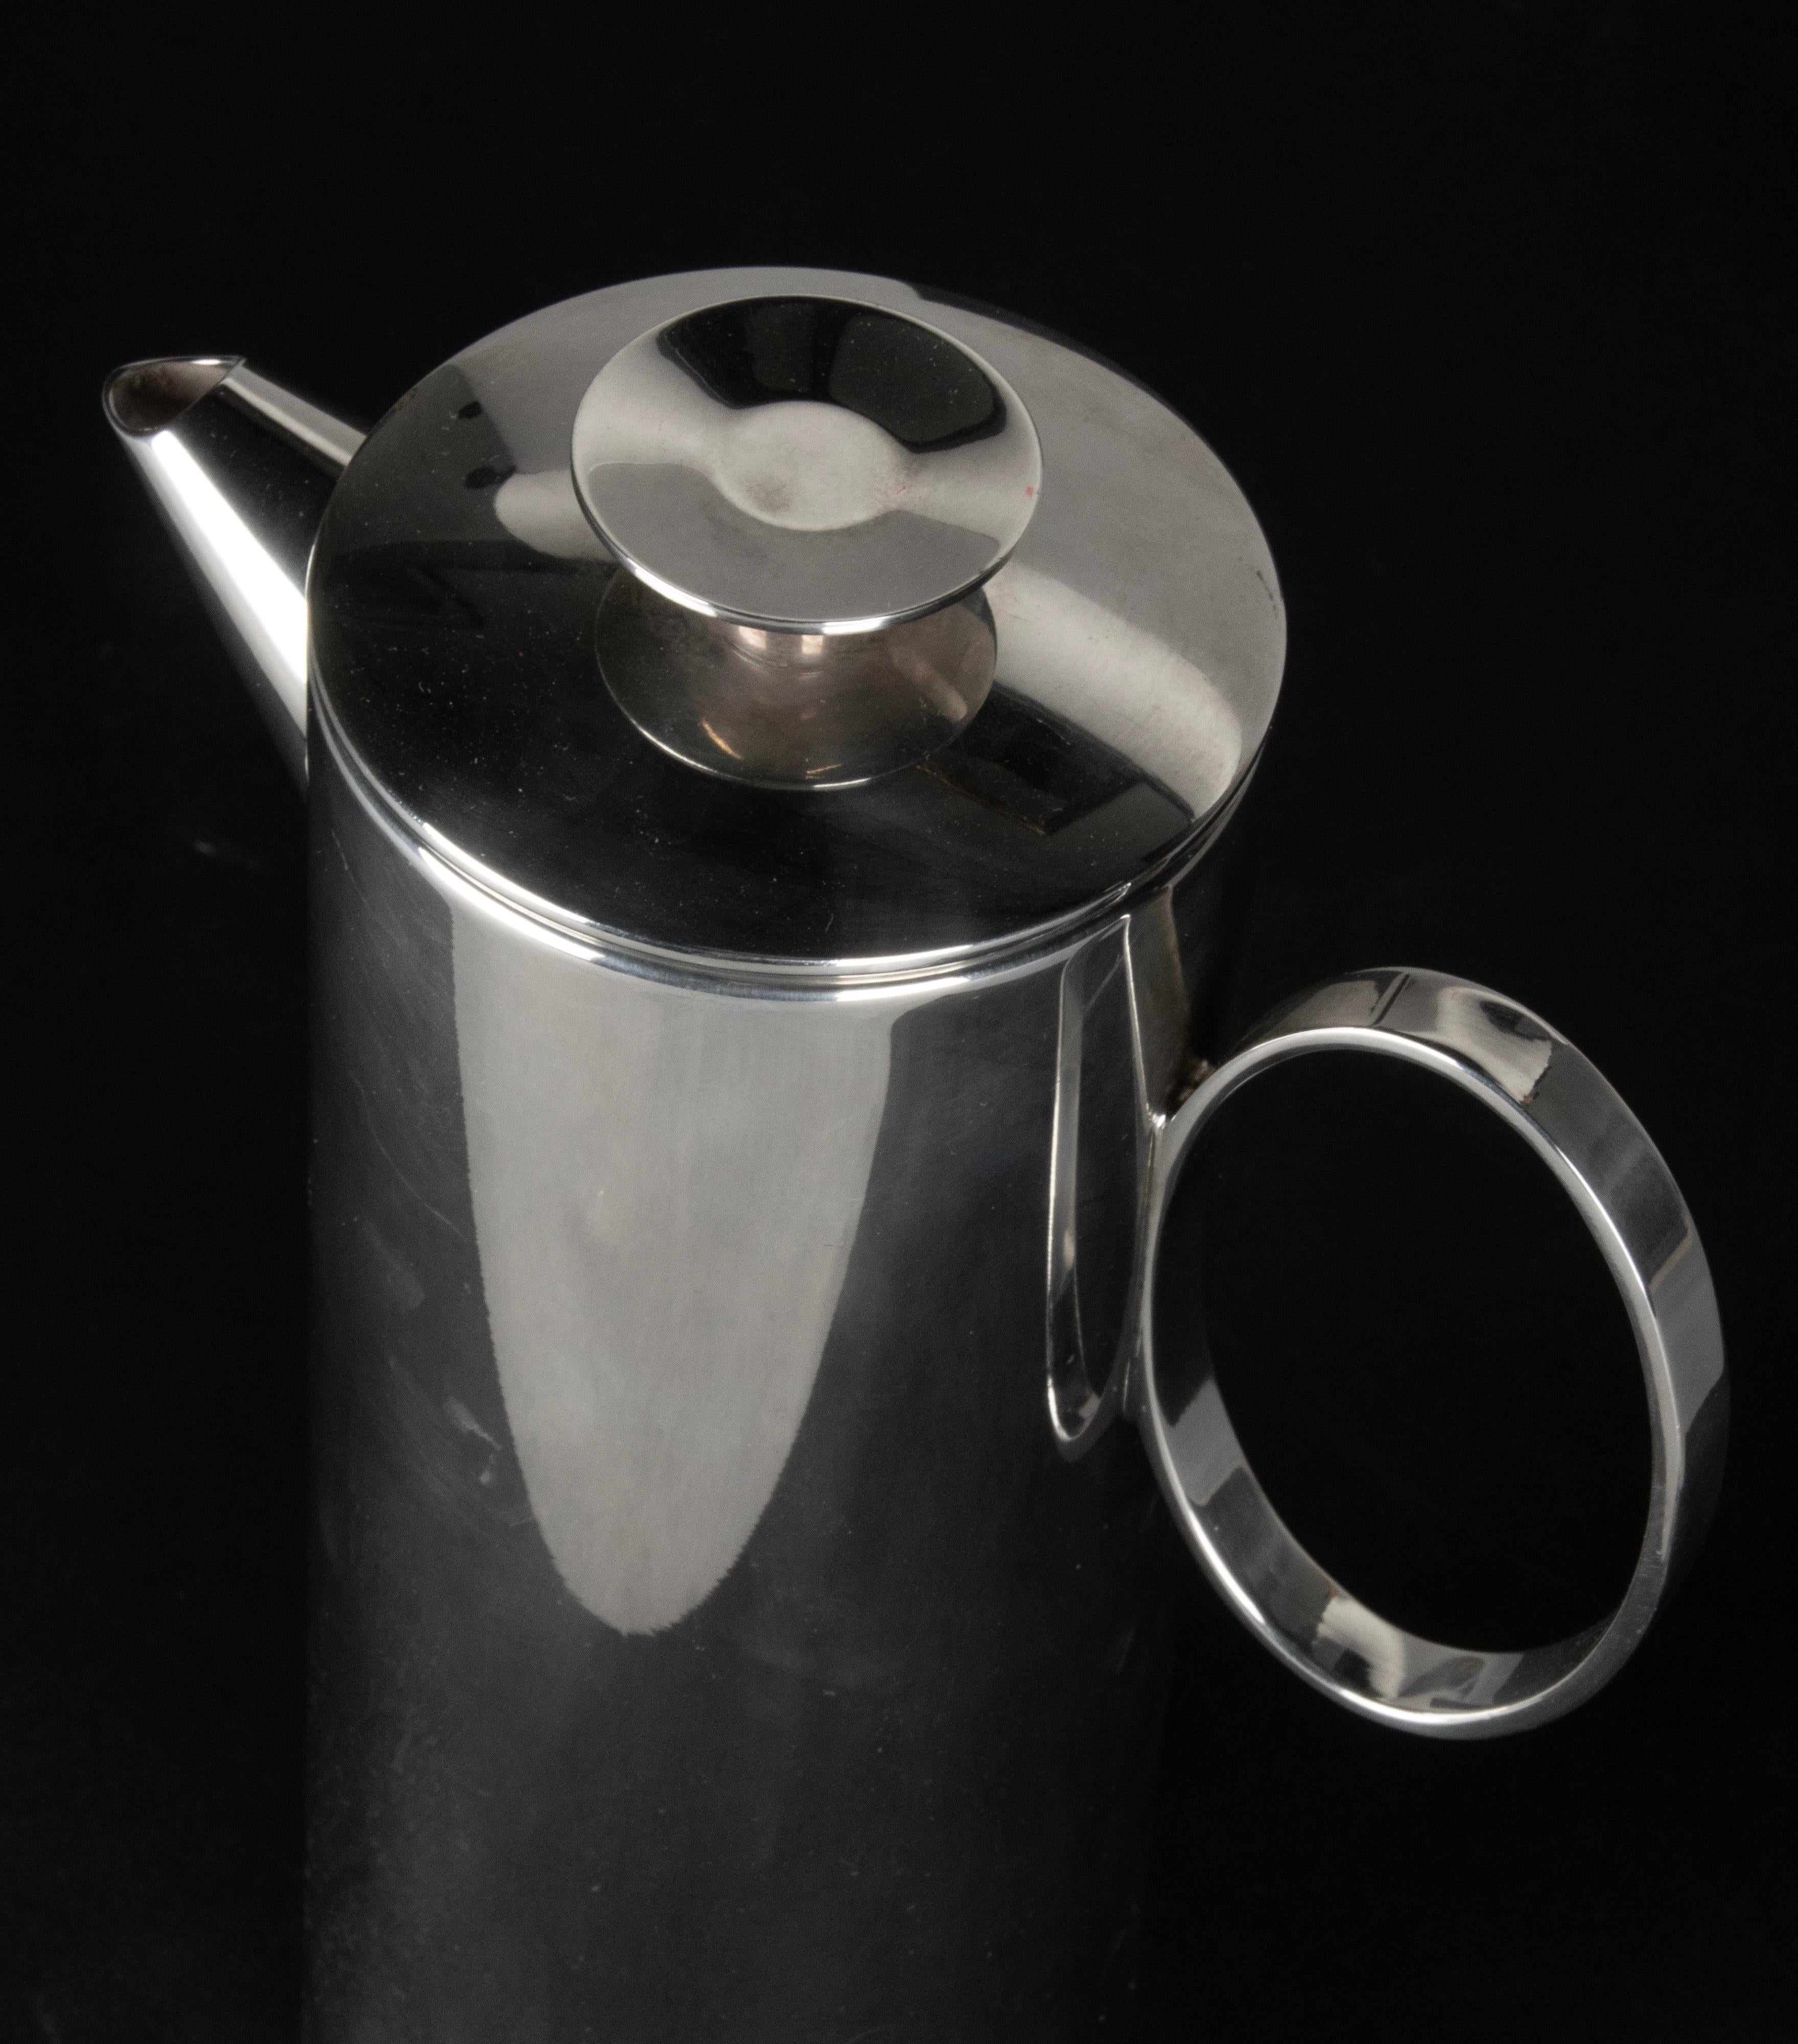 Mid-Century Modern Silver Plated Coffee Pot made by Christofle, Lino Sabattini For Sale 5